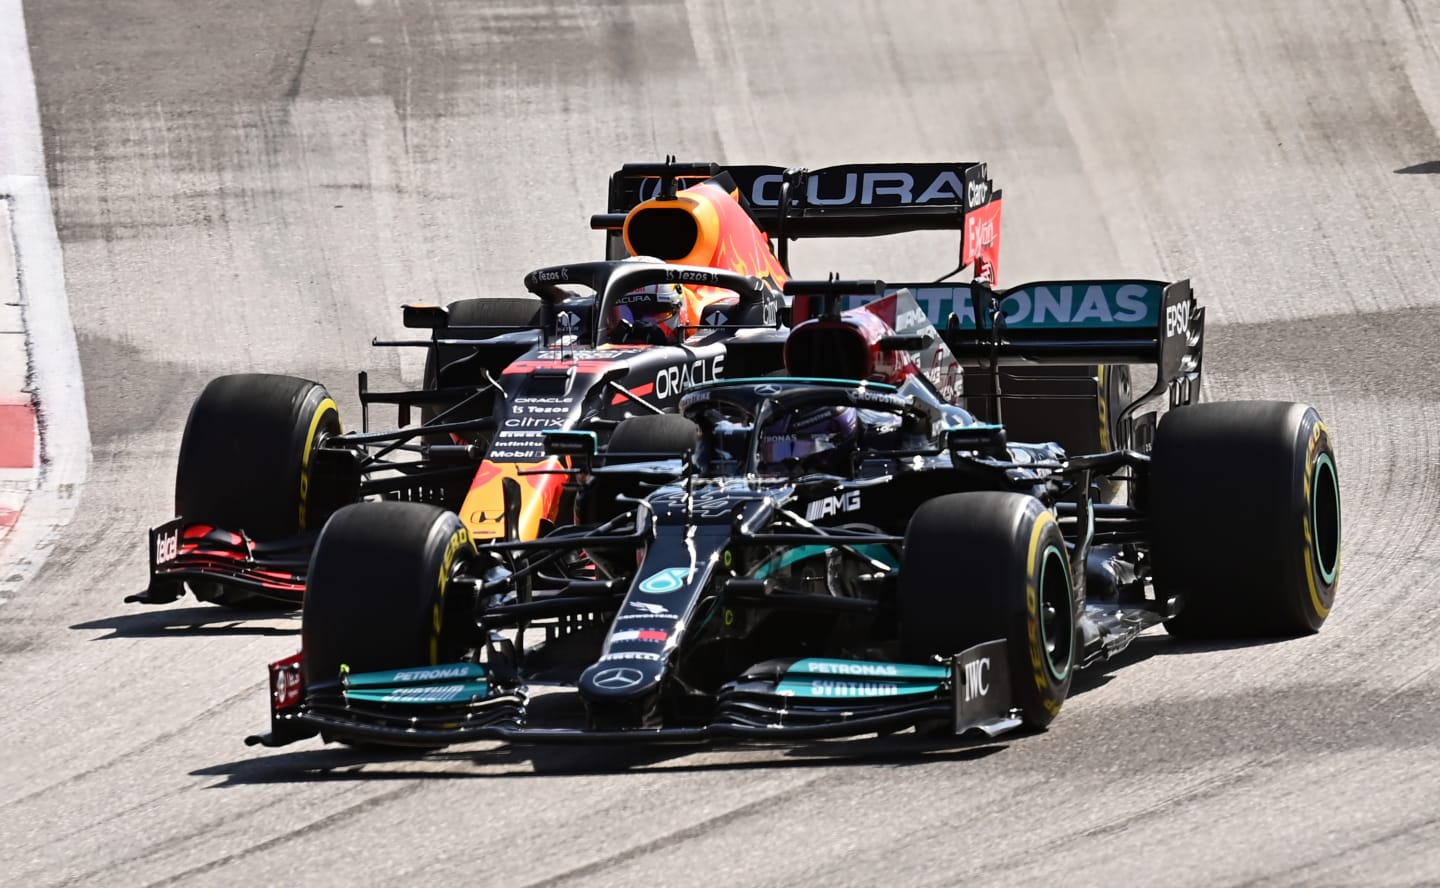 AUSTIN, TEXAS - OCTOBER 24: Lewis Hamilton of Great Britain driving the (44) Mercedes AMG Petronas F1 Team Mercedes W12 and Max Verstappen of the Netherlands driving the (33) Red Bull Racing RB16B Honda battle for position at the start during the F1 Grand Prix of USA at Circuit of The Americas on October 24, 2021 in Austin, Texas. (Photo by Clive Mason - Formula 1/Formula 1 via Getty Images)